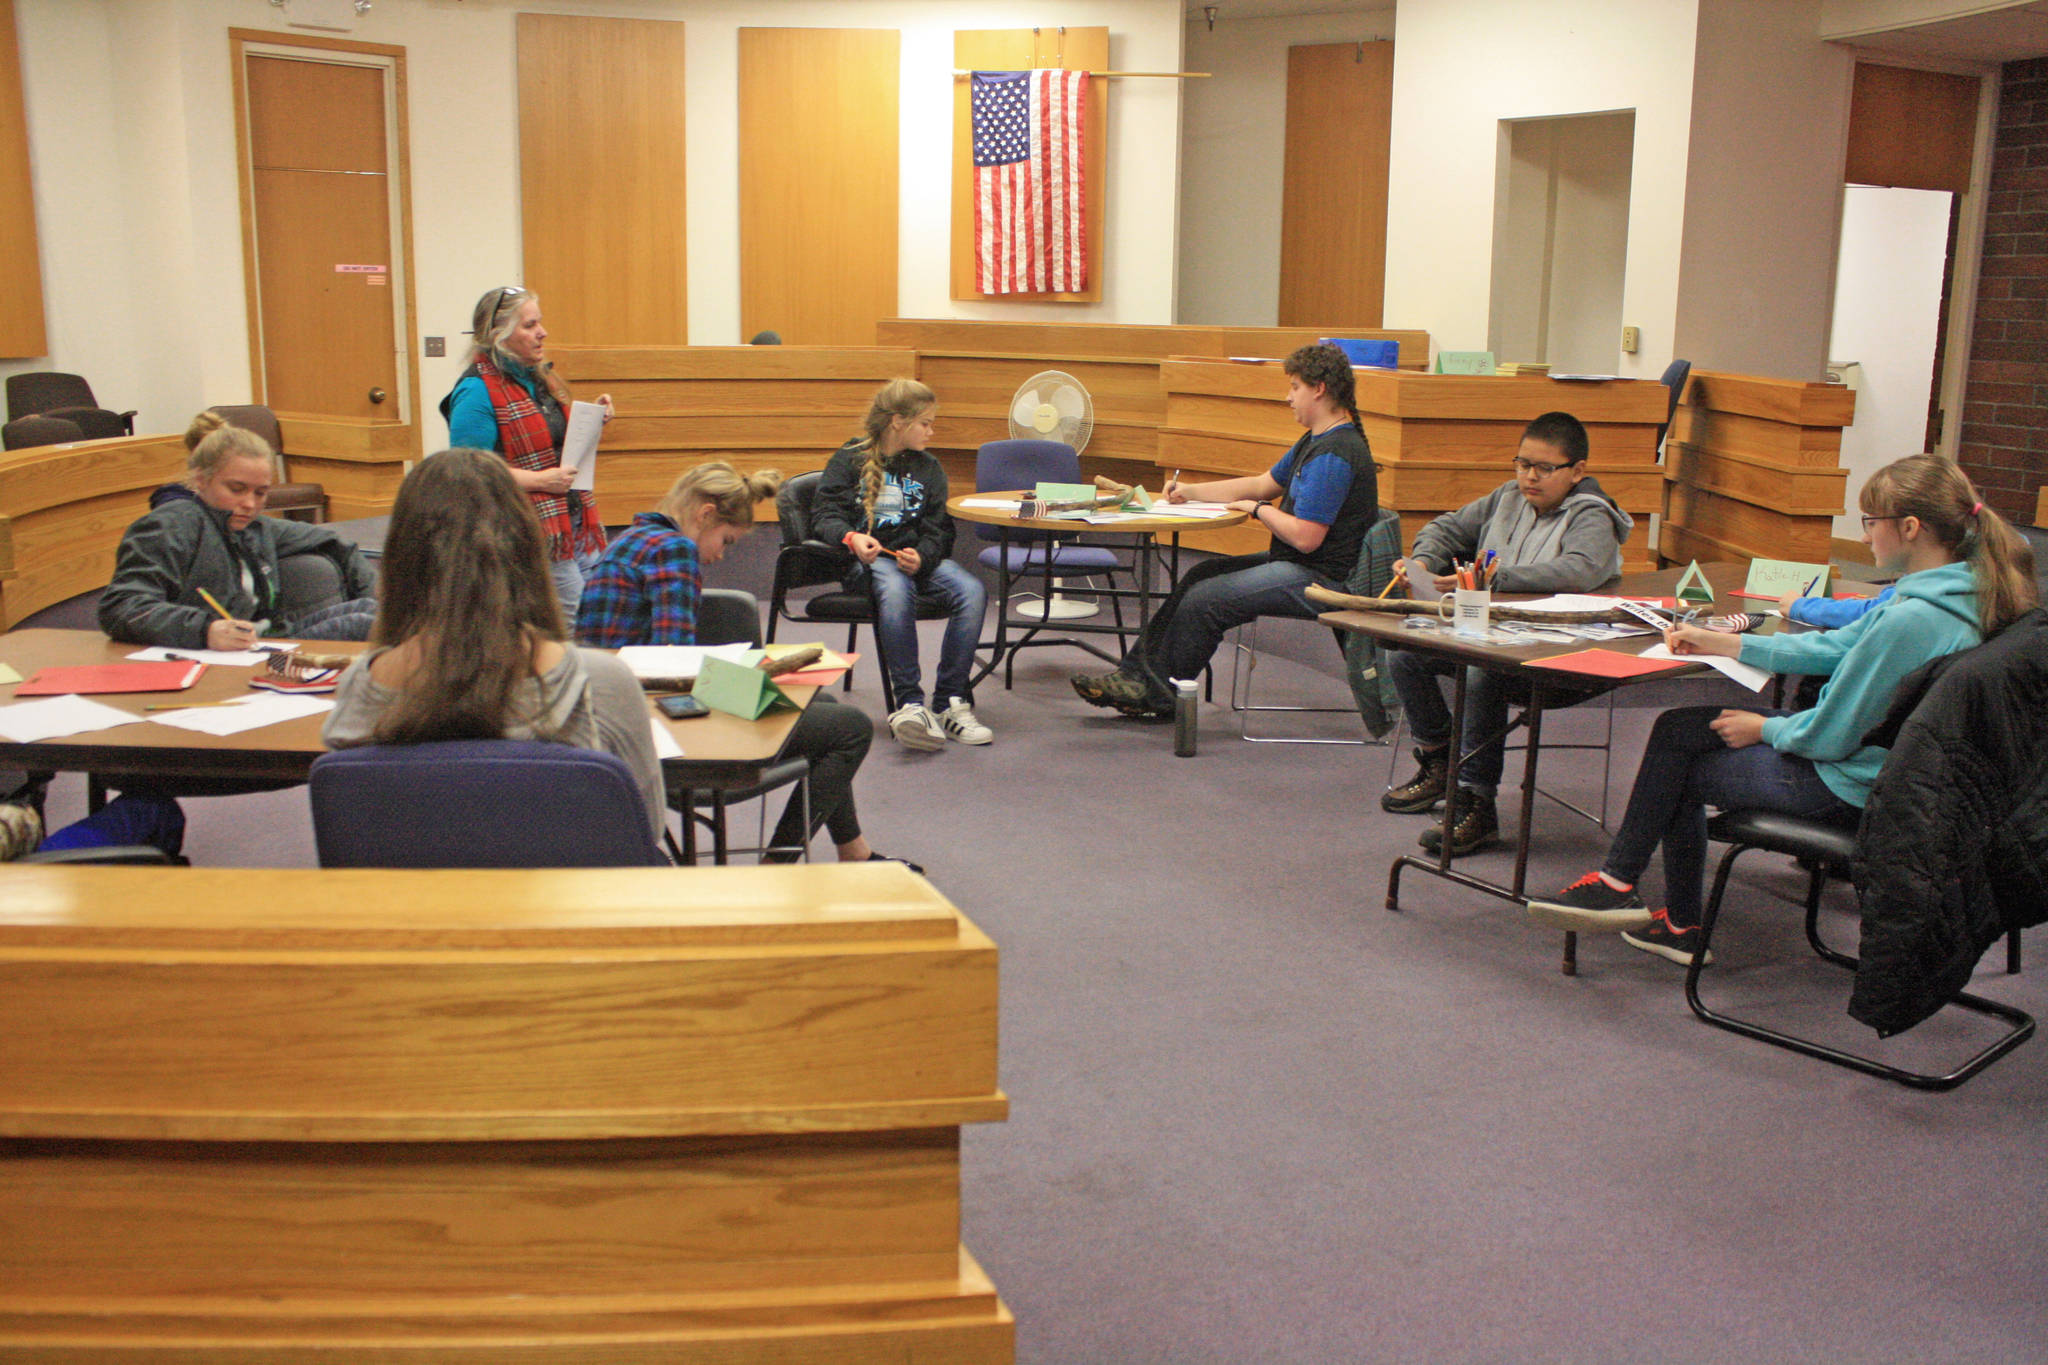 Students listen to Kenai Peninsula Youth Court Director Ginny Espenshade during a training session at the Old Kenai Courthouse on Jan. 30. The students are participating in a weeks-long program to prepare them for roles on the court. (Photo by Erin Thompson/Peninsula Clarion)